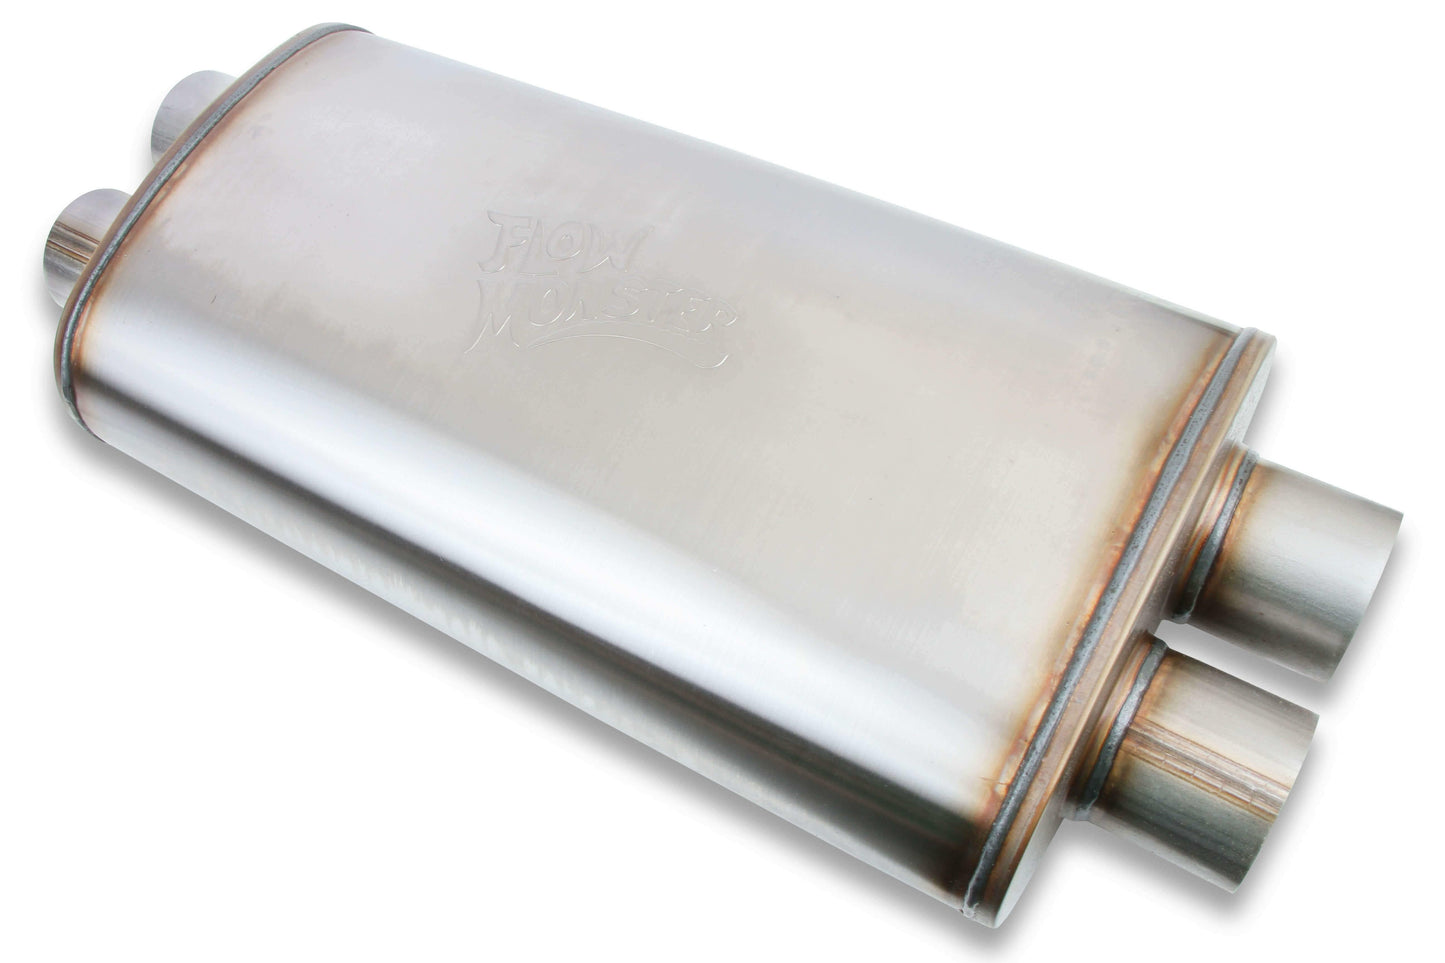 Flowmonster Performance Muffler 3 inch dual inlet & outlet 12599-FM 409 Stainles